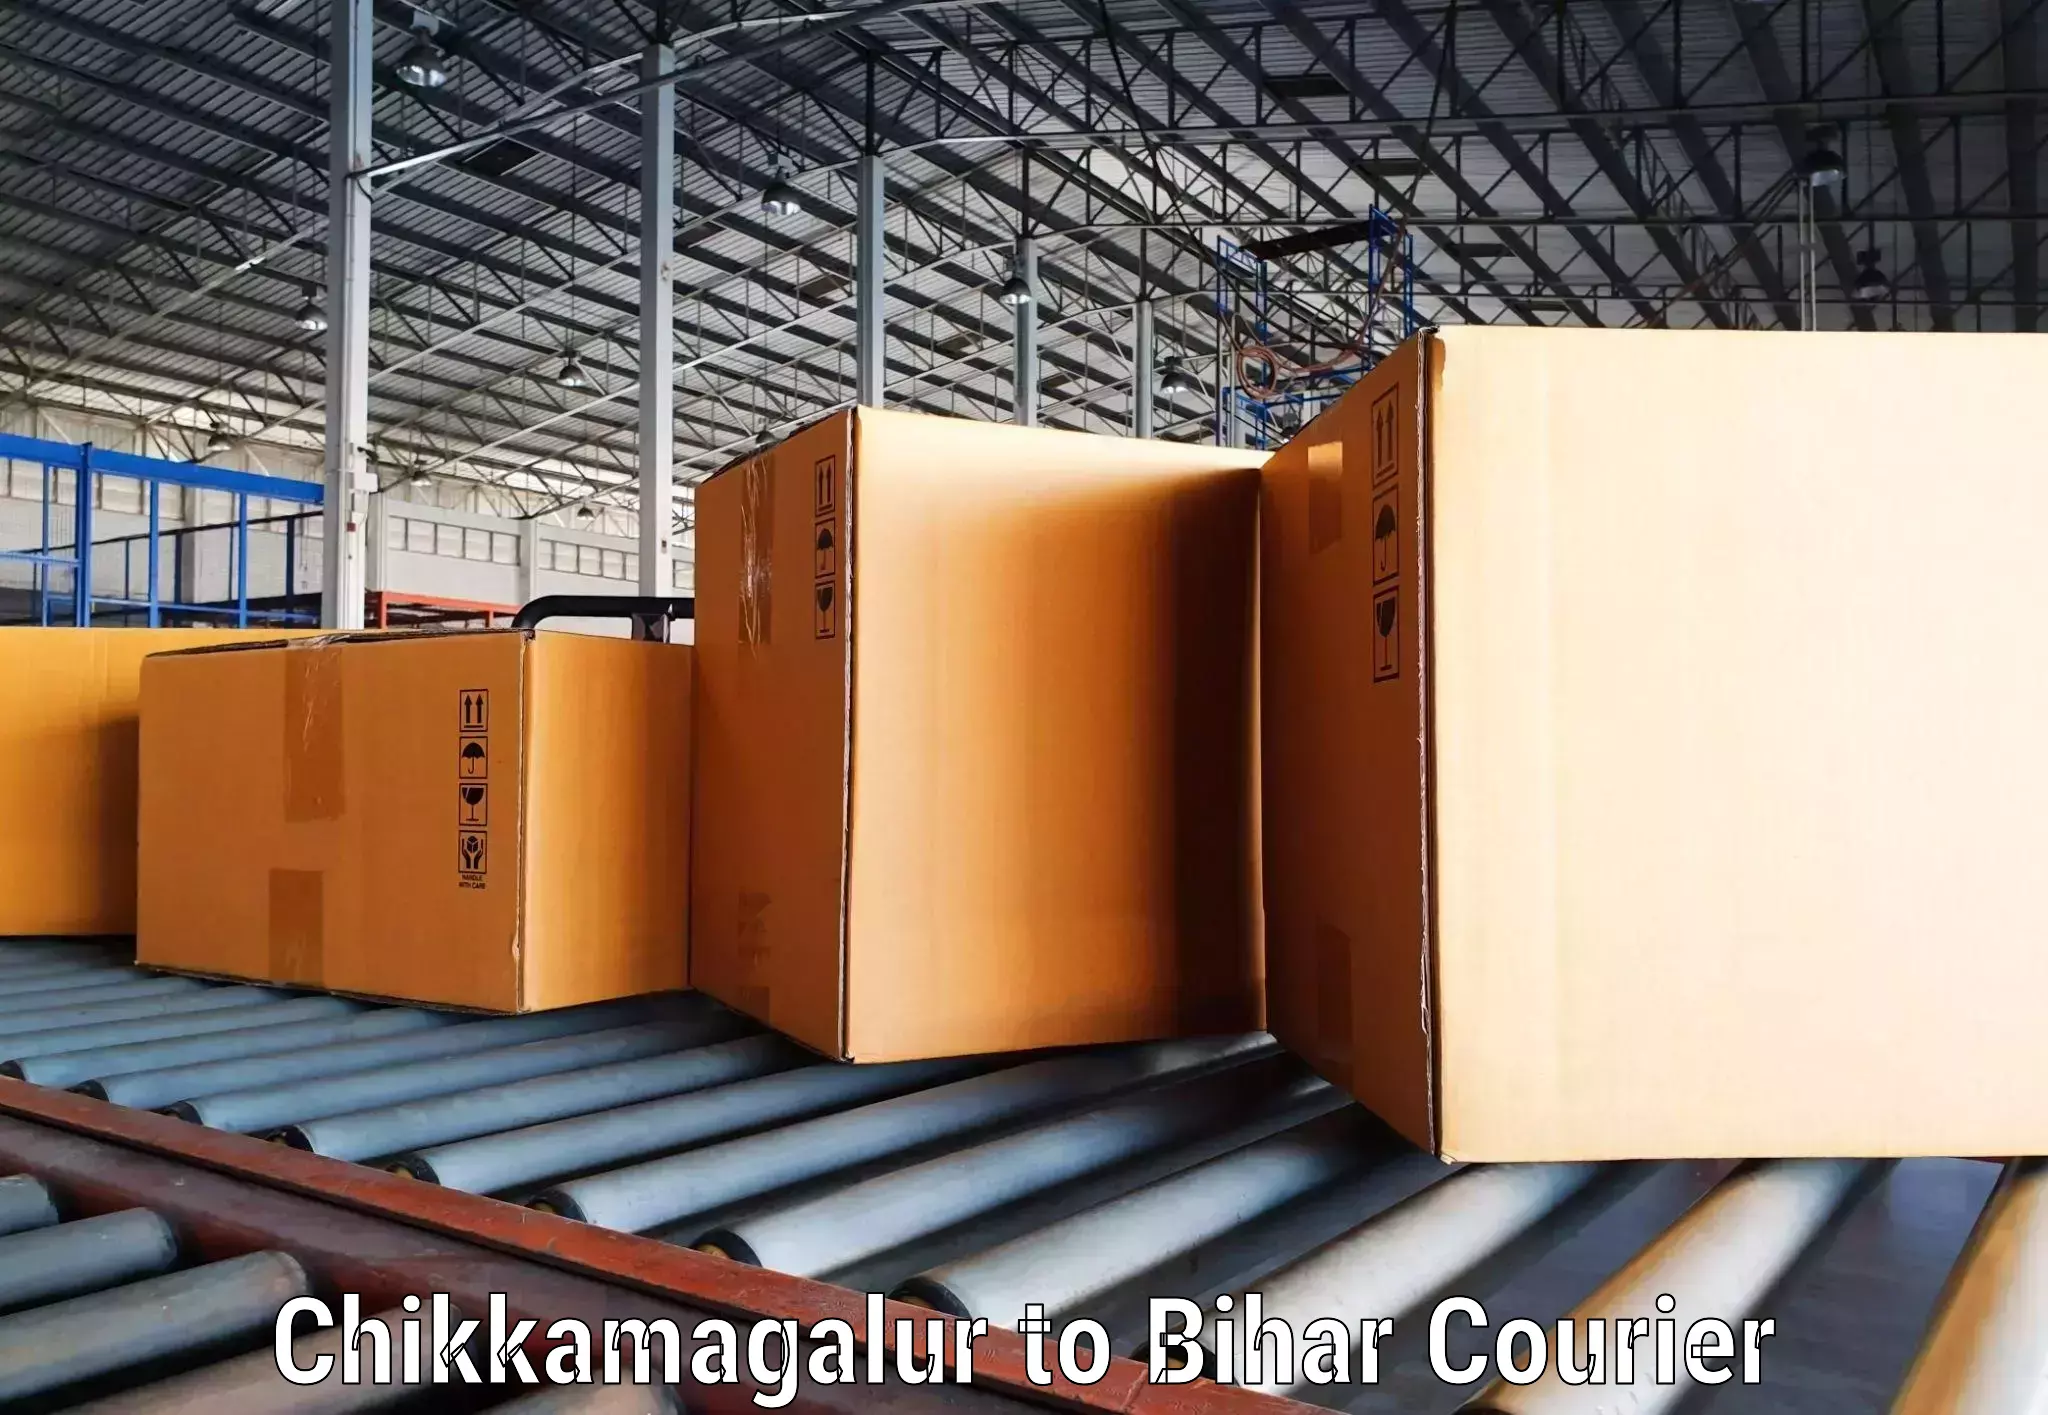 Courier service efficiency Chikkamagalur to Dinara